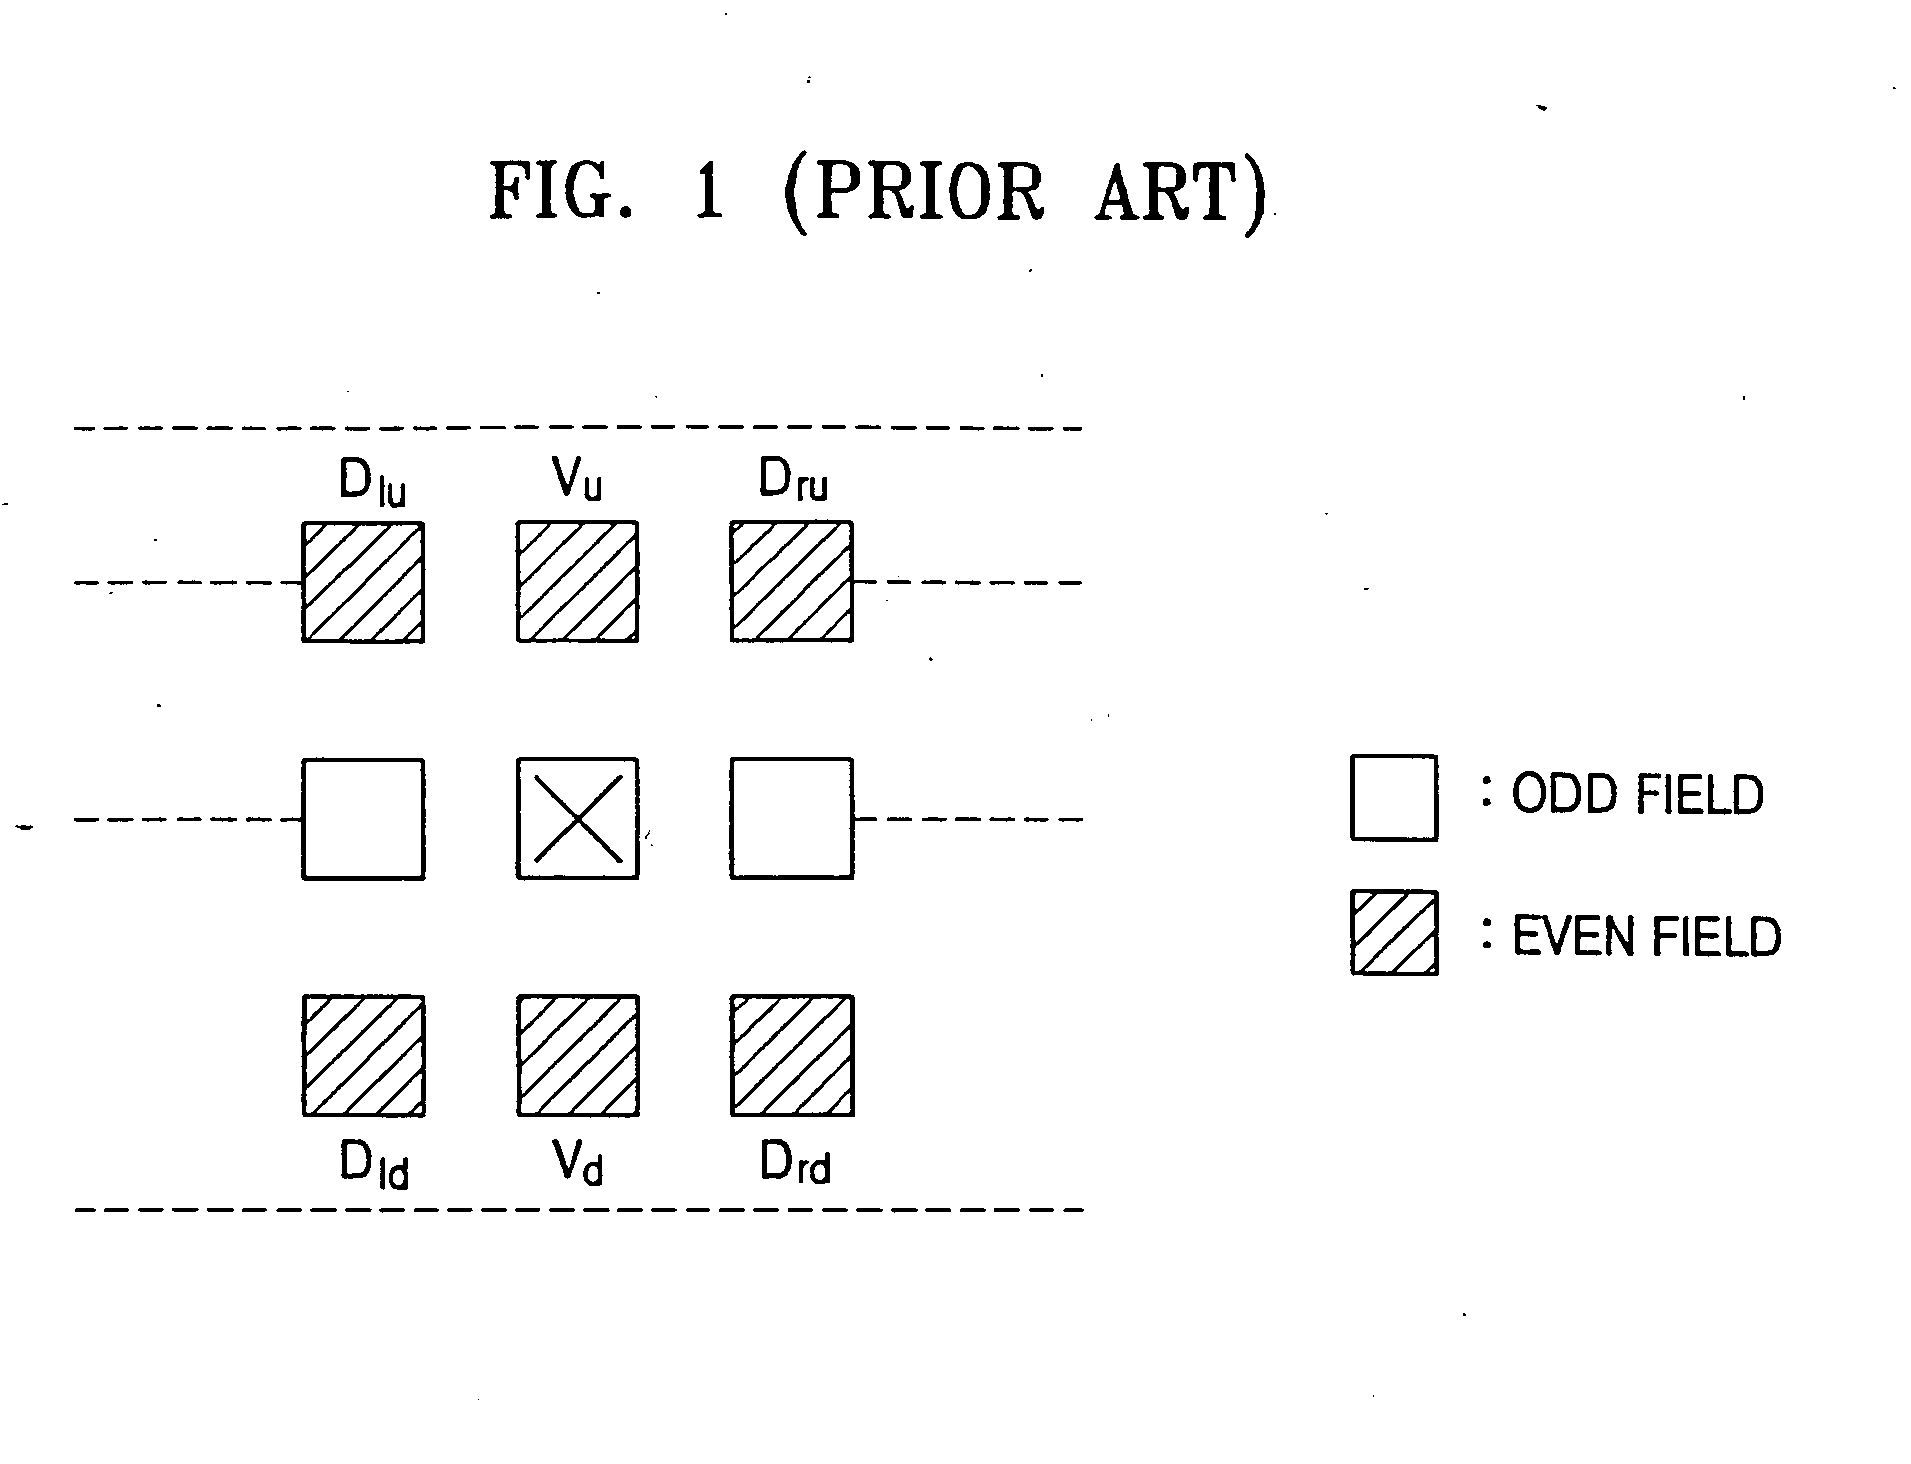 Apparatus and method for converting interlaced image into progressive image